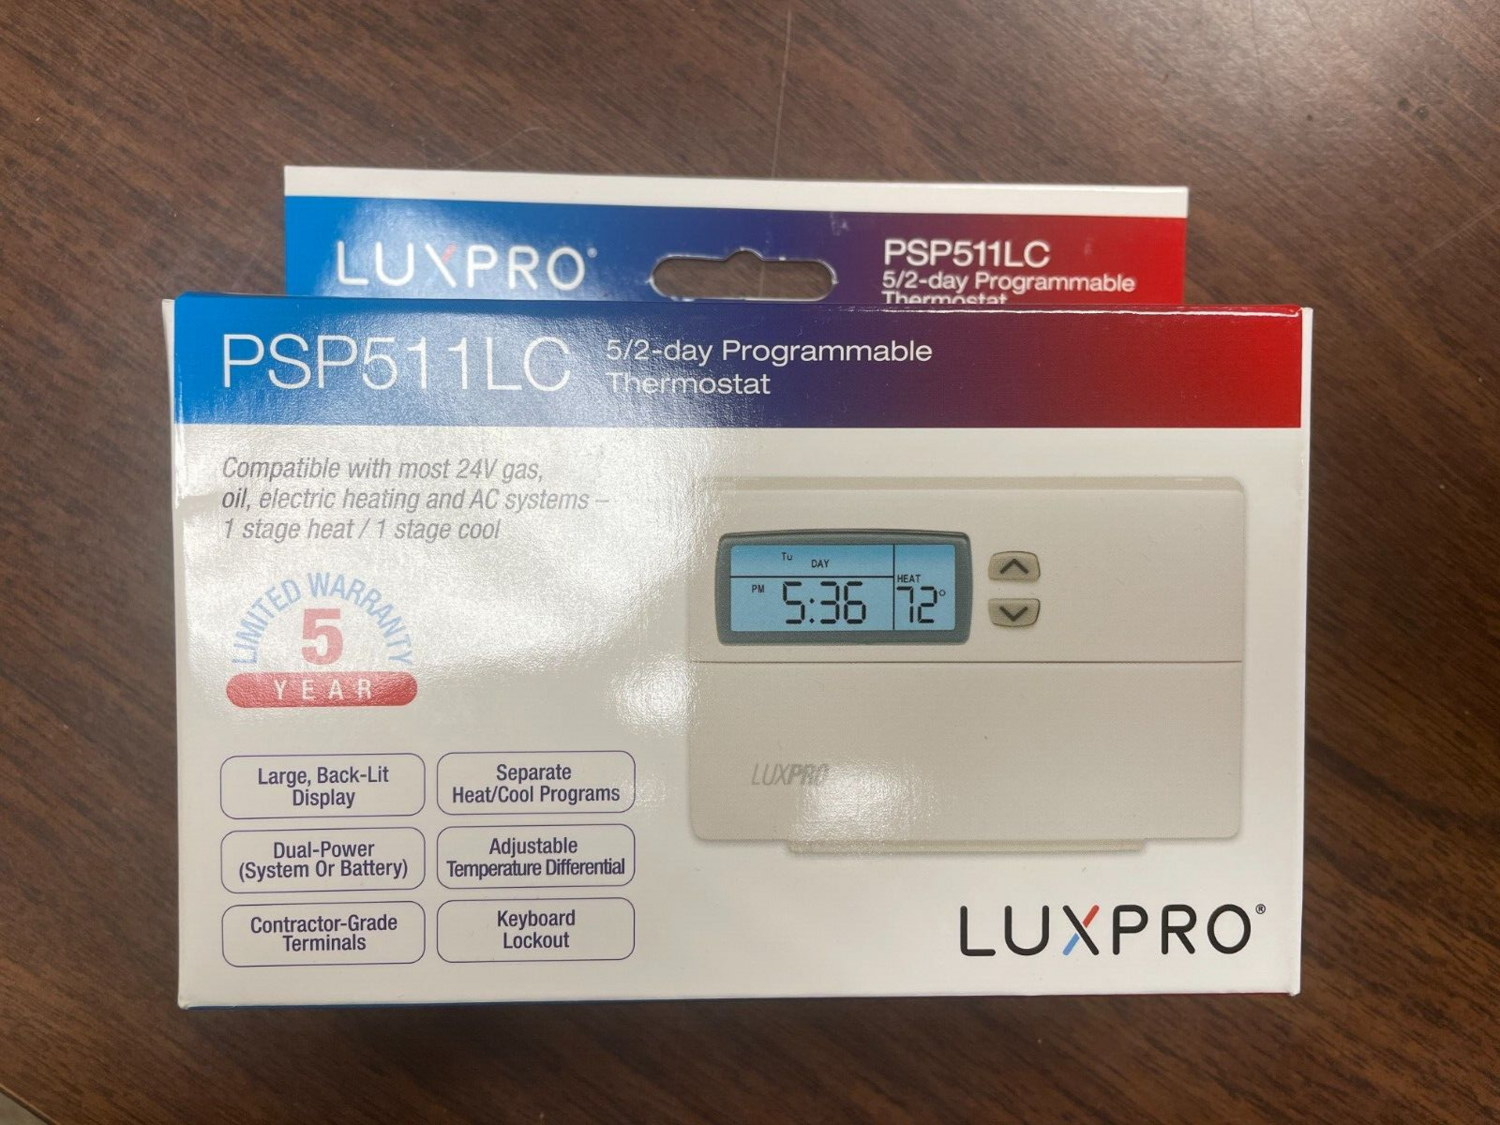 Luxpro psp511lc 5/2-Day Programmable Thermostat